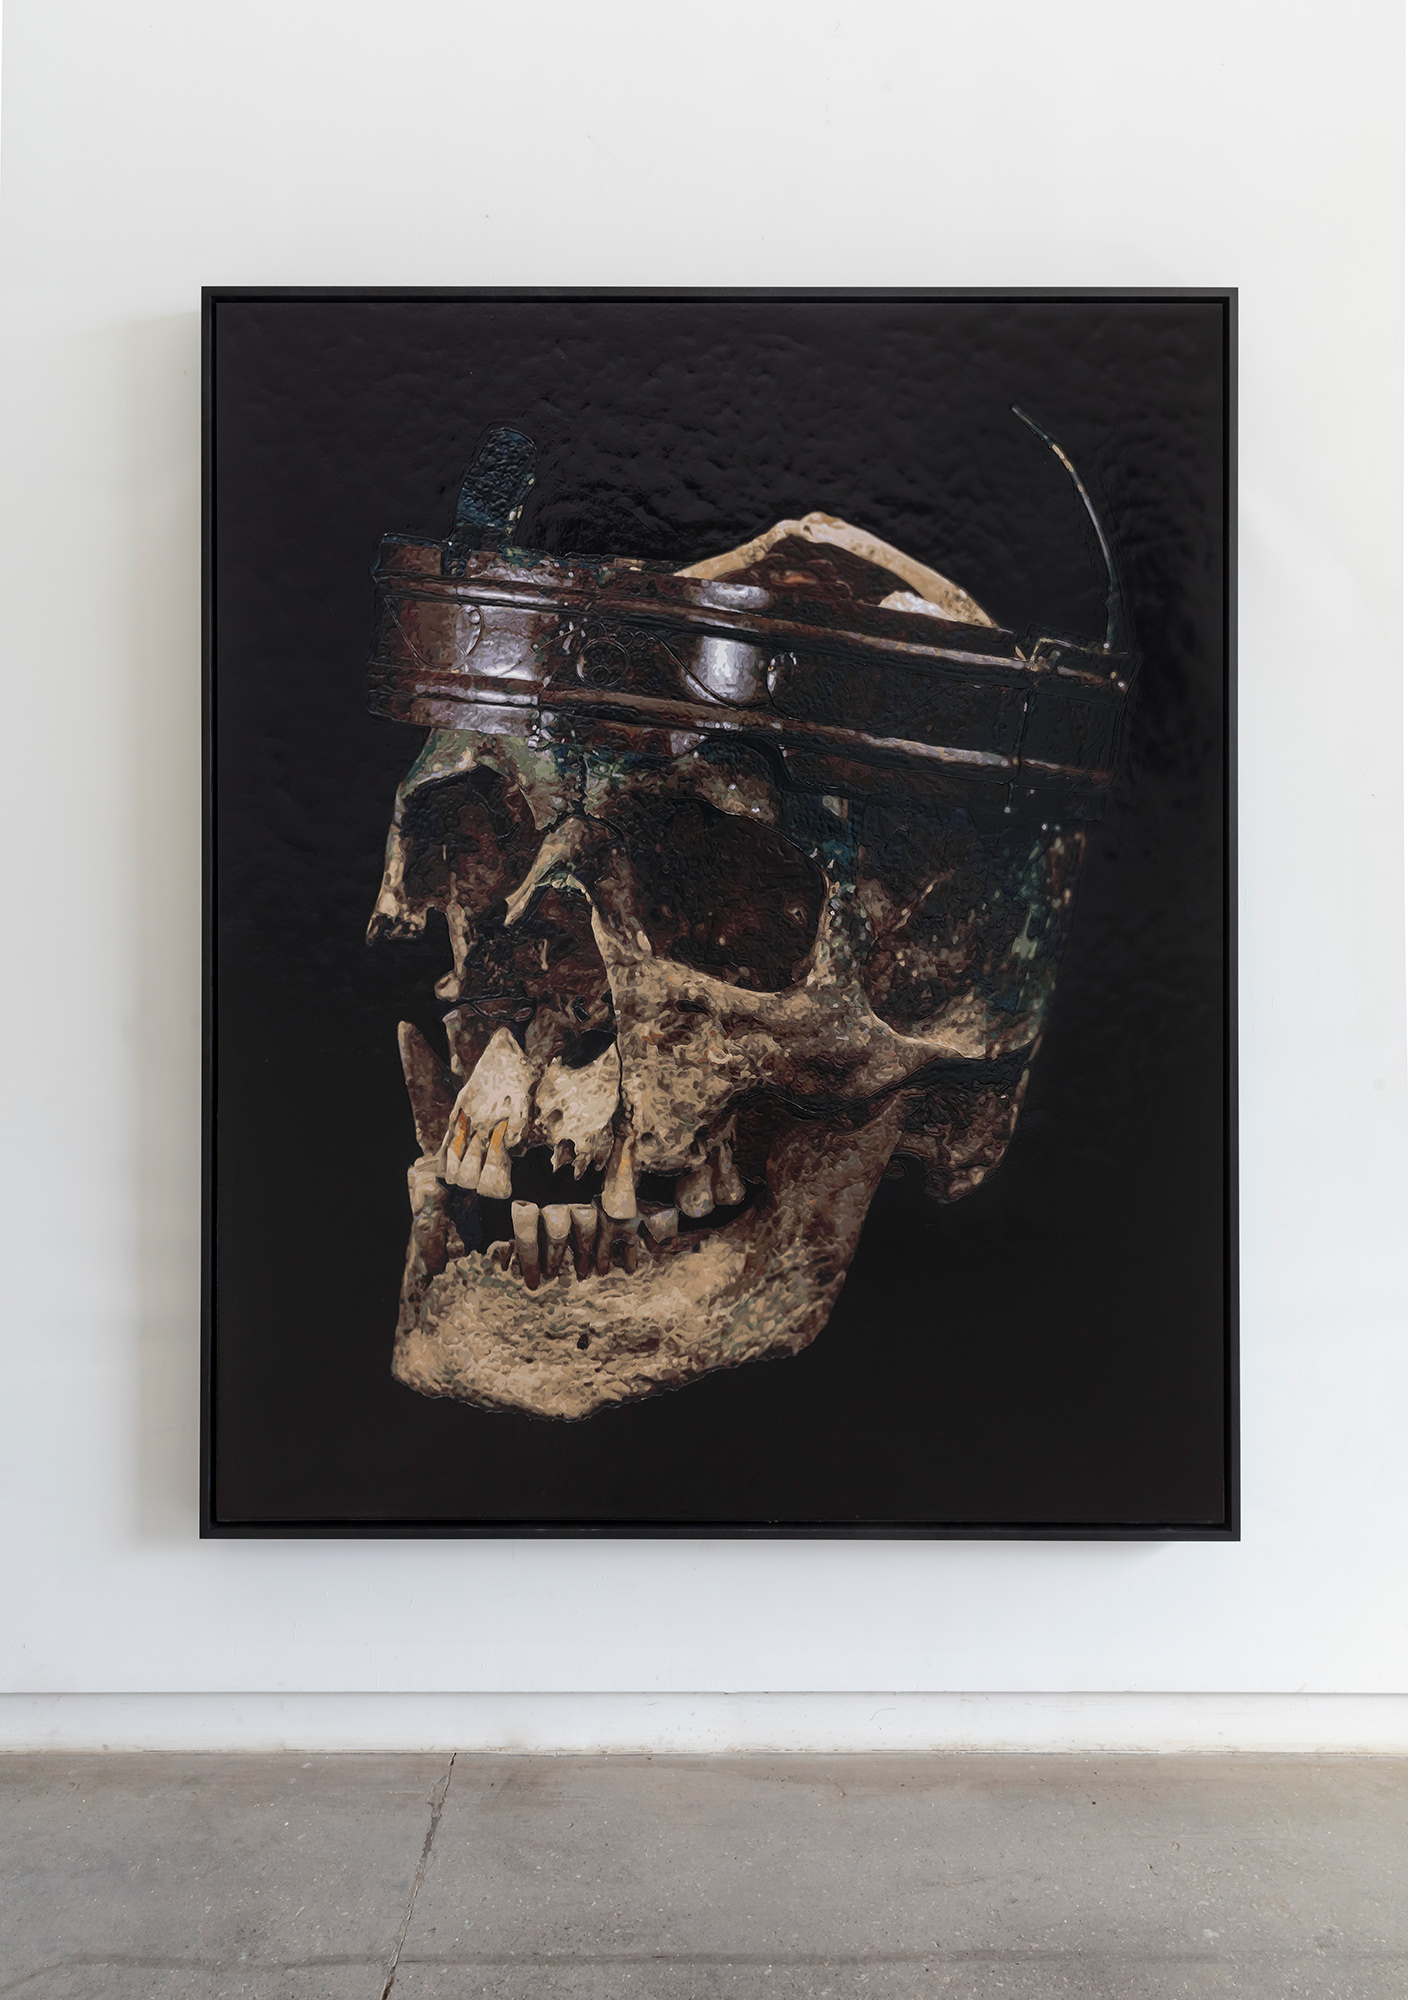  Dorian FitzGerald,  Iron Age Skull and Crown (Warrior or Druid), Kent, United Kingdo m, 2017, acrylic on canvas mounted to board, 78 x 68 inches 